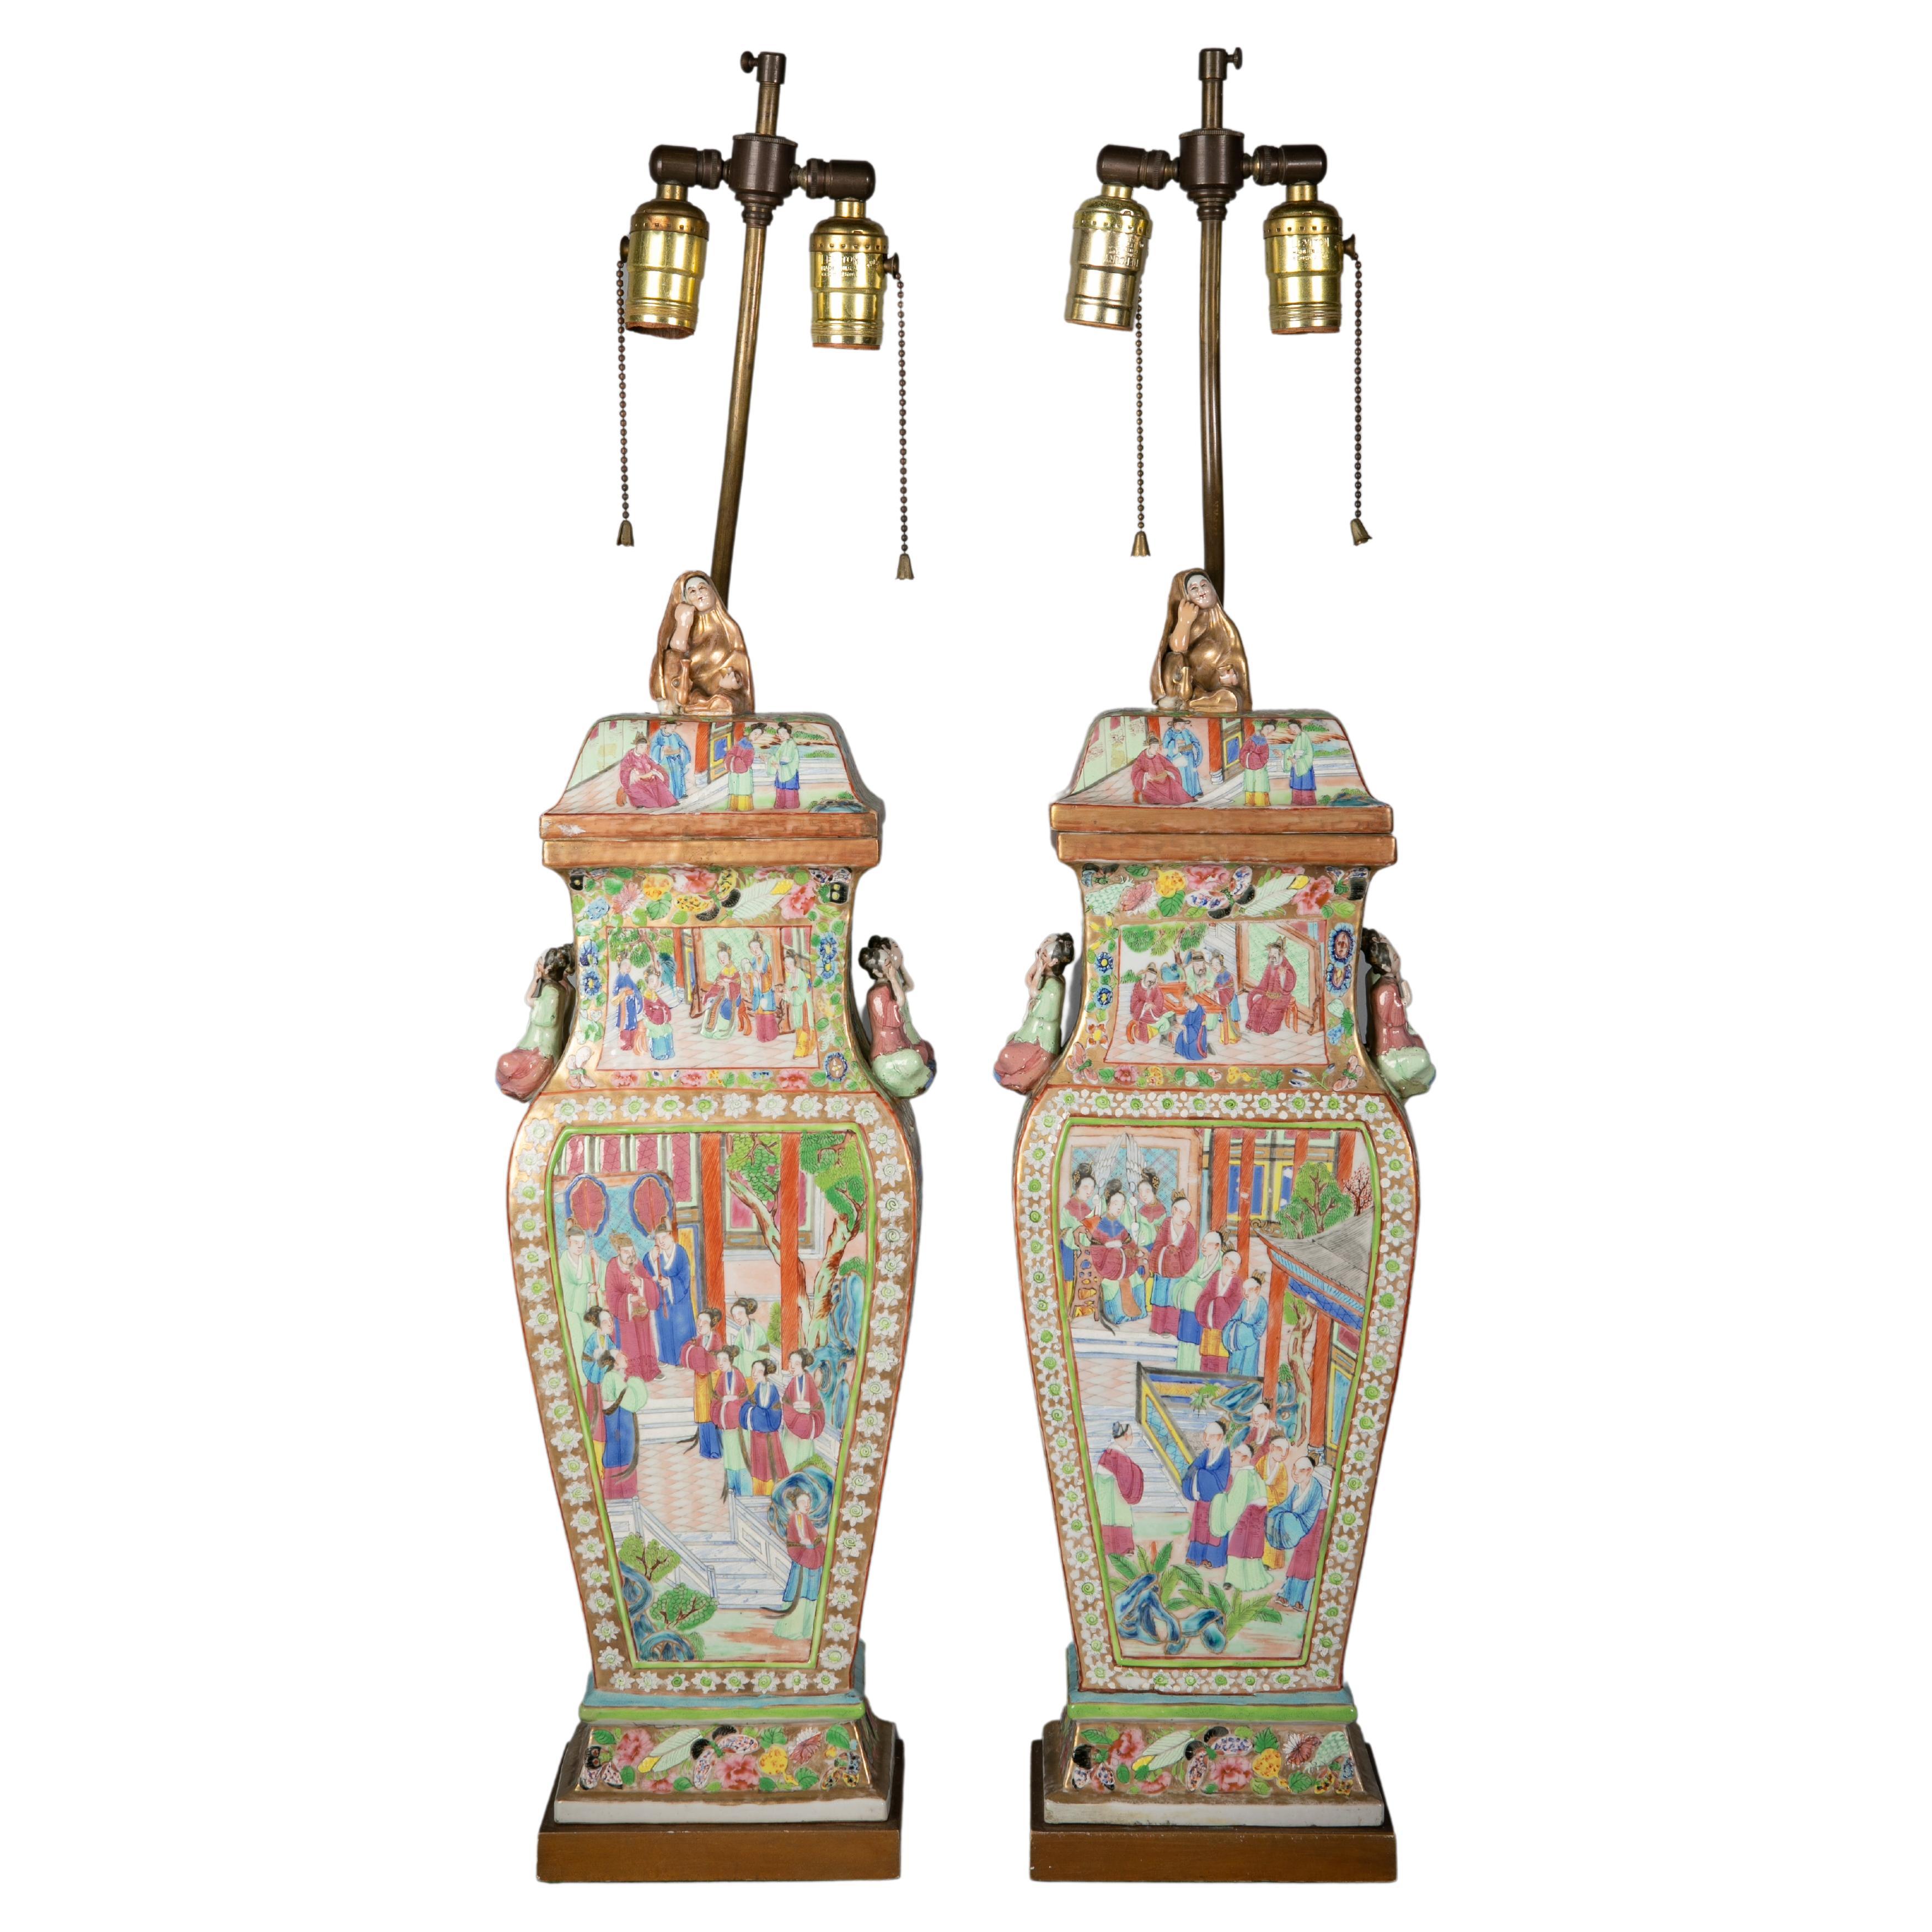 Pair of Fine Chinese Porcelain Rose Mandarin Covered Vases as Lamps, Circa 1840